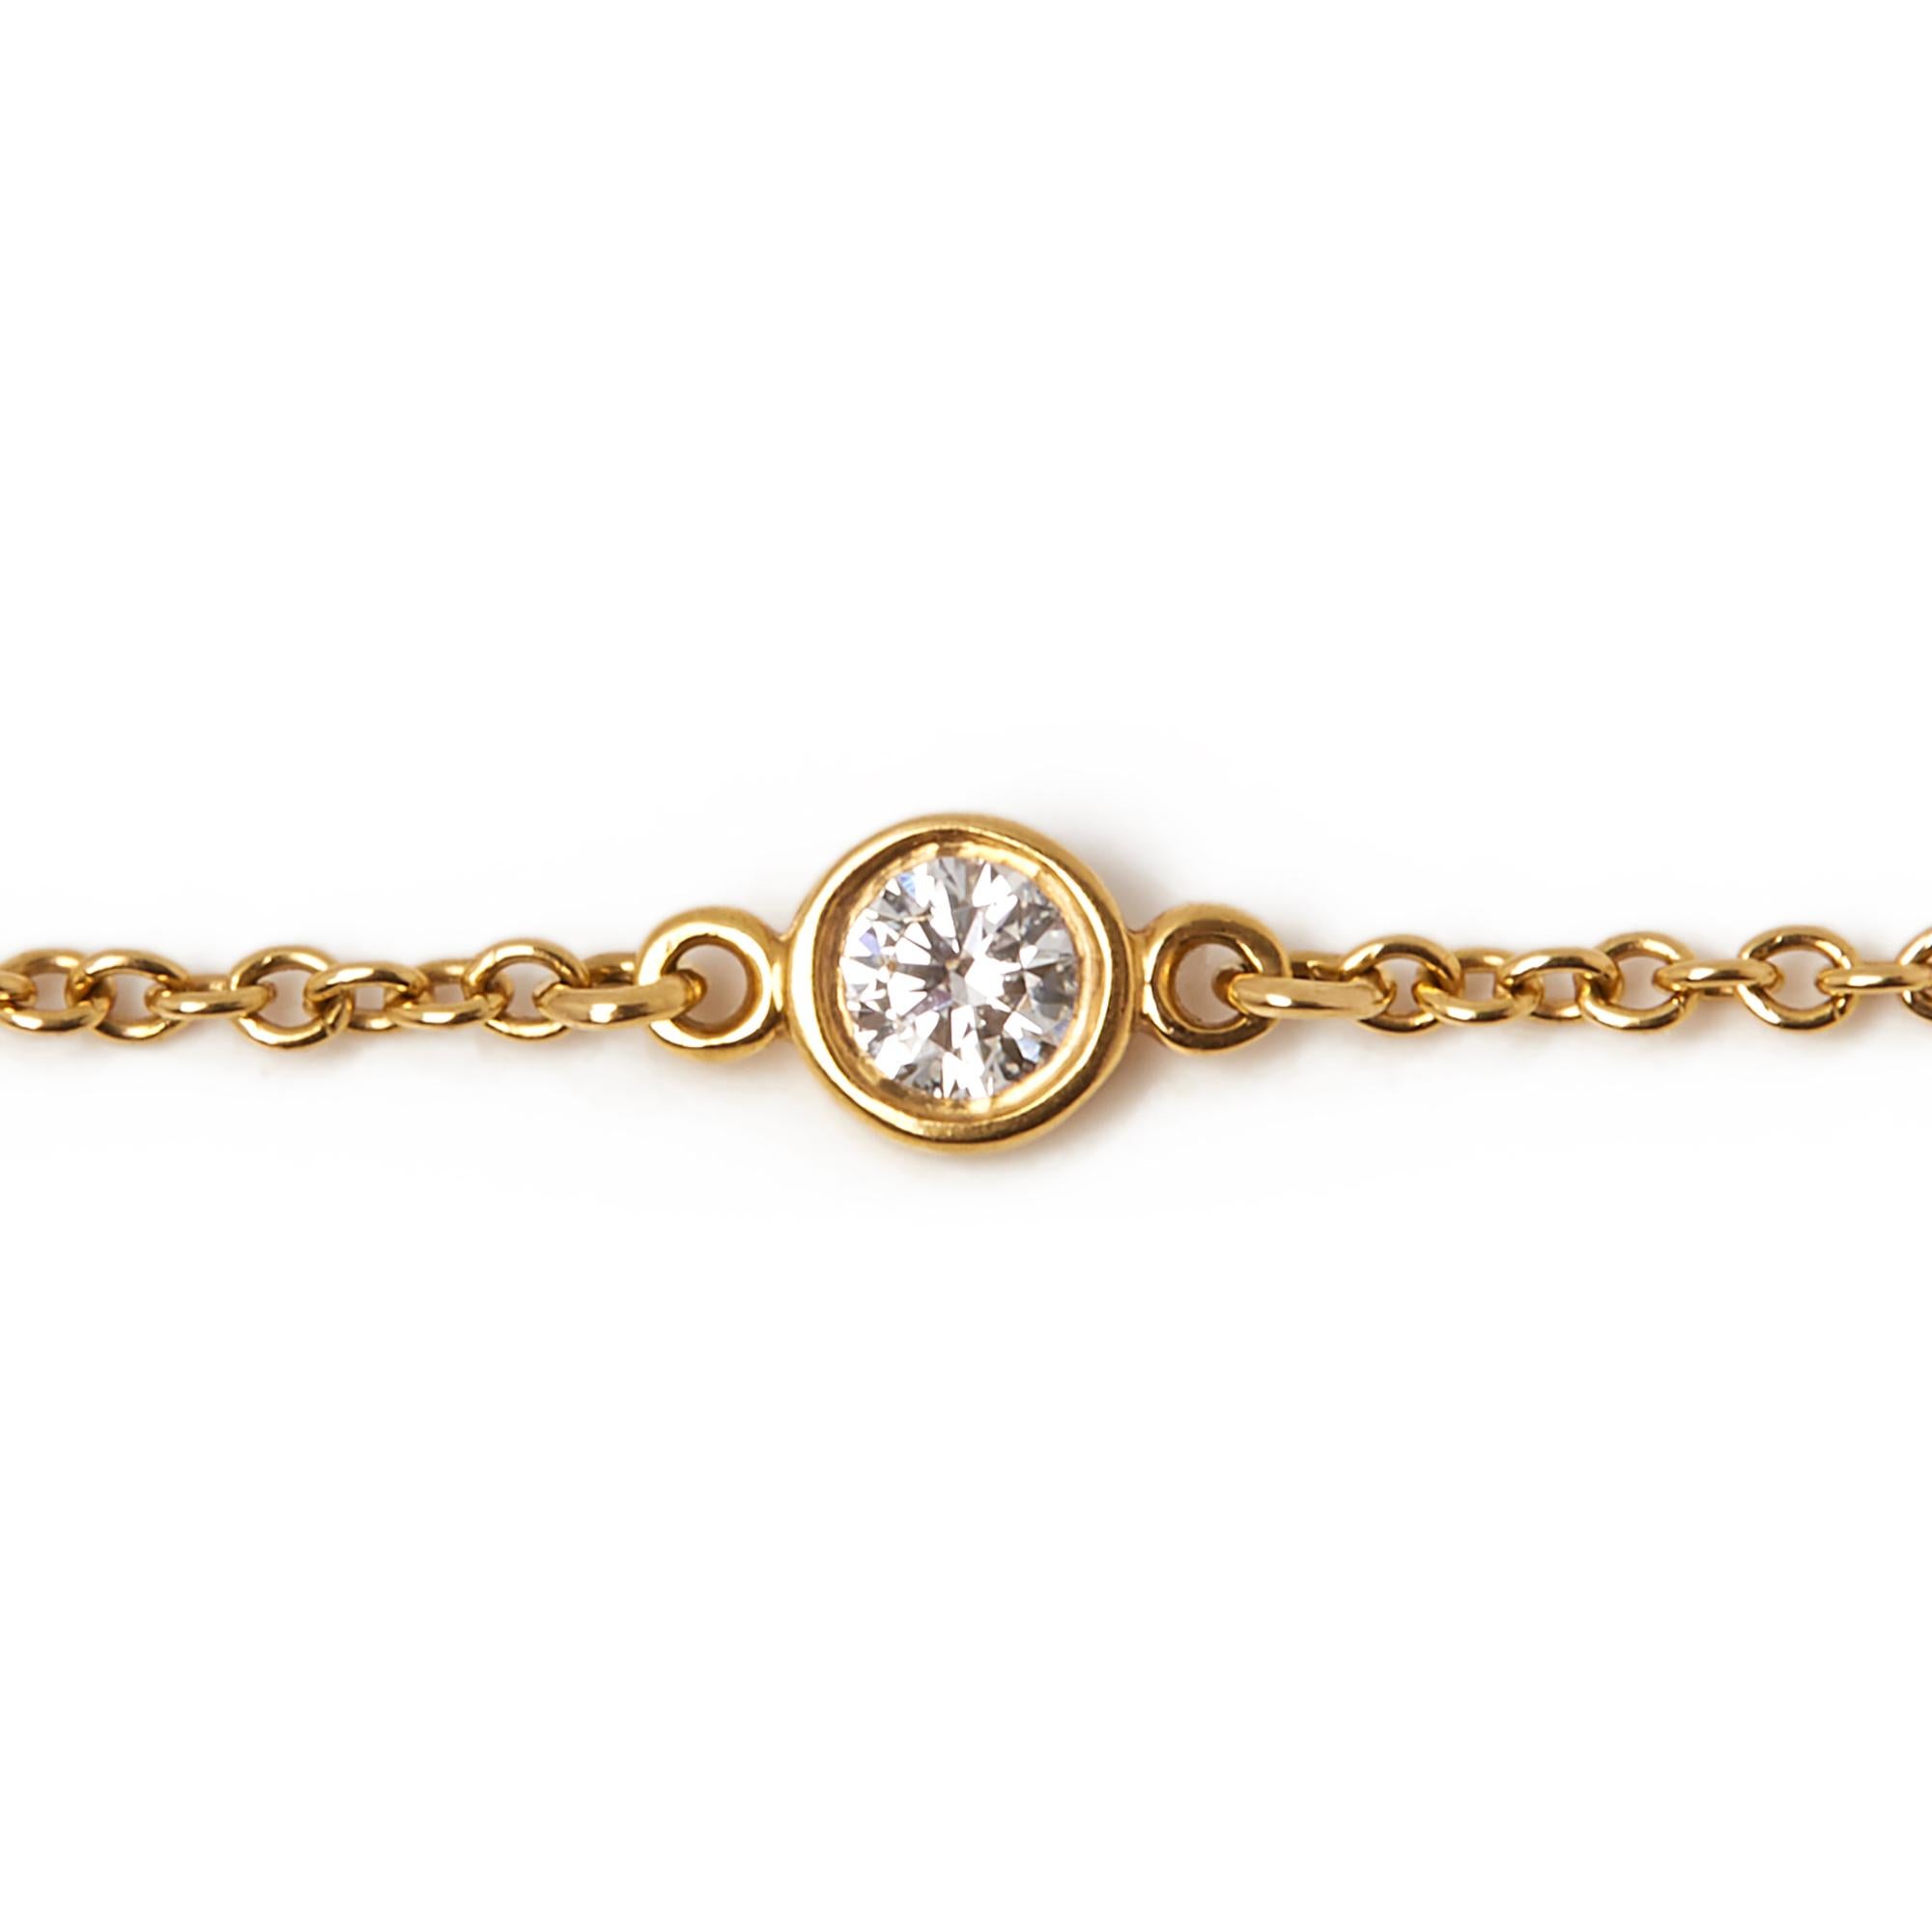 Code: COM2089
Brand: Tiffany & Co.
Description: 18k Yellow Gold Elsa Peretti Diamonds By The Yard Bracelet
Accompanied With: Box & Papers
Gender: Ladies
Bracelet Length: 18cm
Bracelet Width: 3mm
Clasp Type: Springring
Condition: 9
Material: Yellow